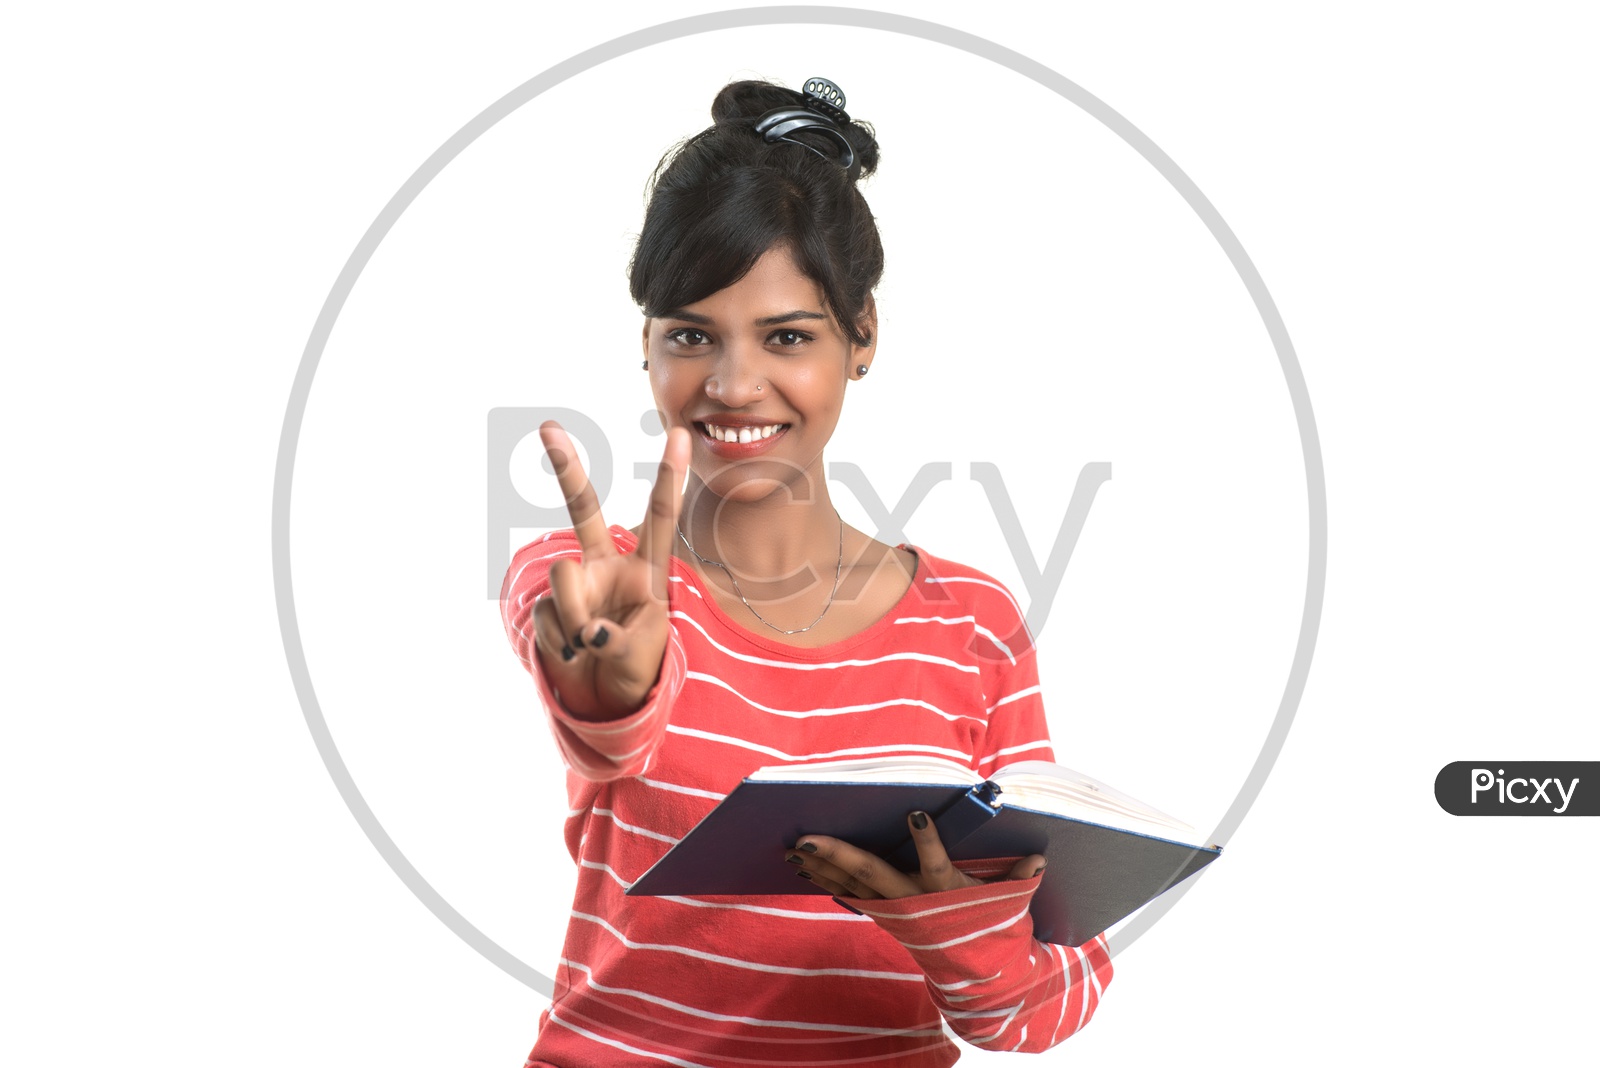 Pretty Young Girl Student Holding Book and  Posing on an isolated White Background